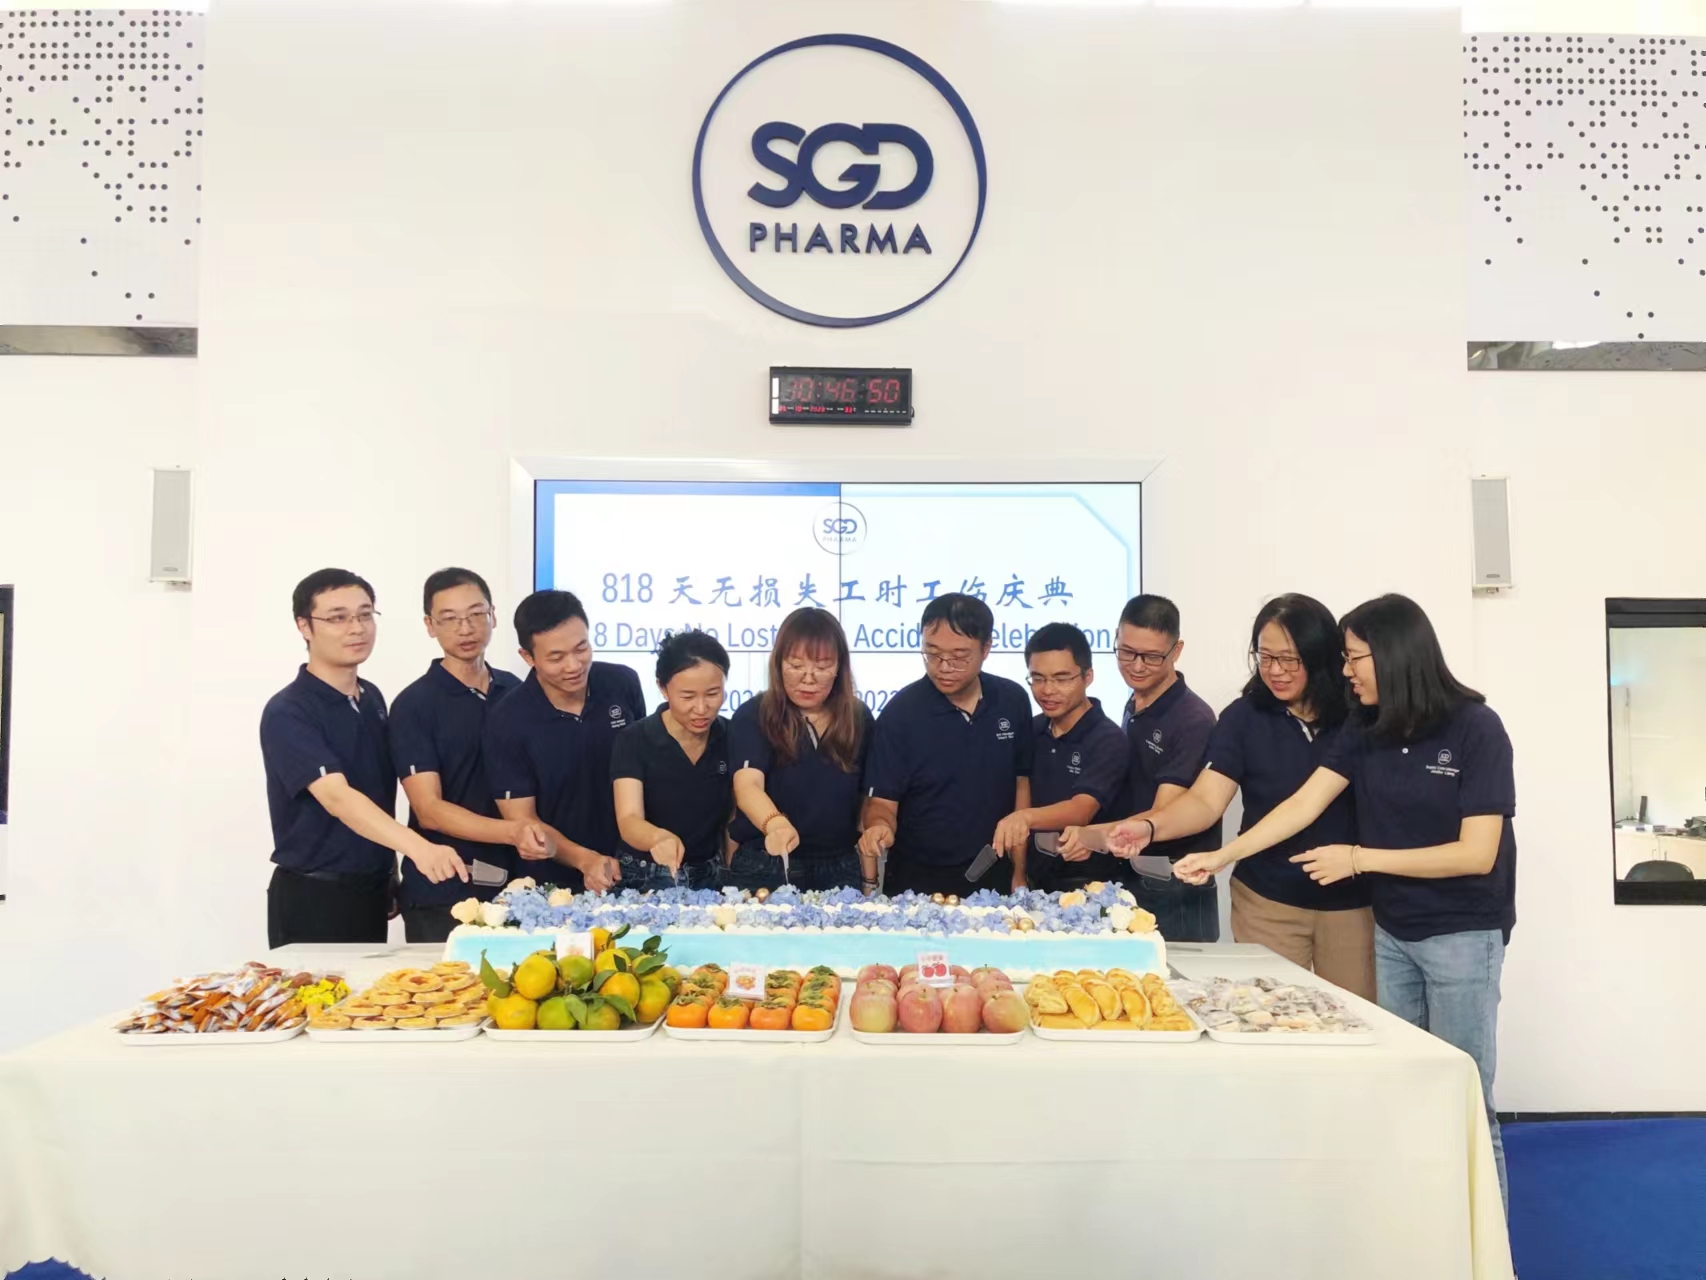 SGD Pharma Zhanjiang Plant Achieves 818 Days Without Lost Time Accidents